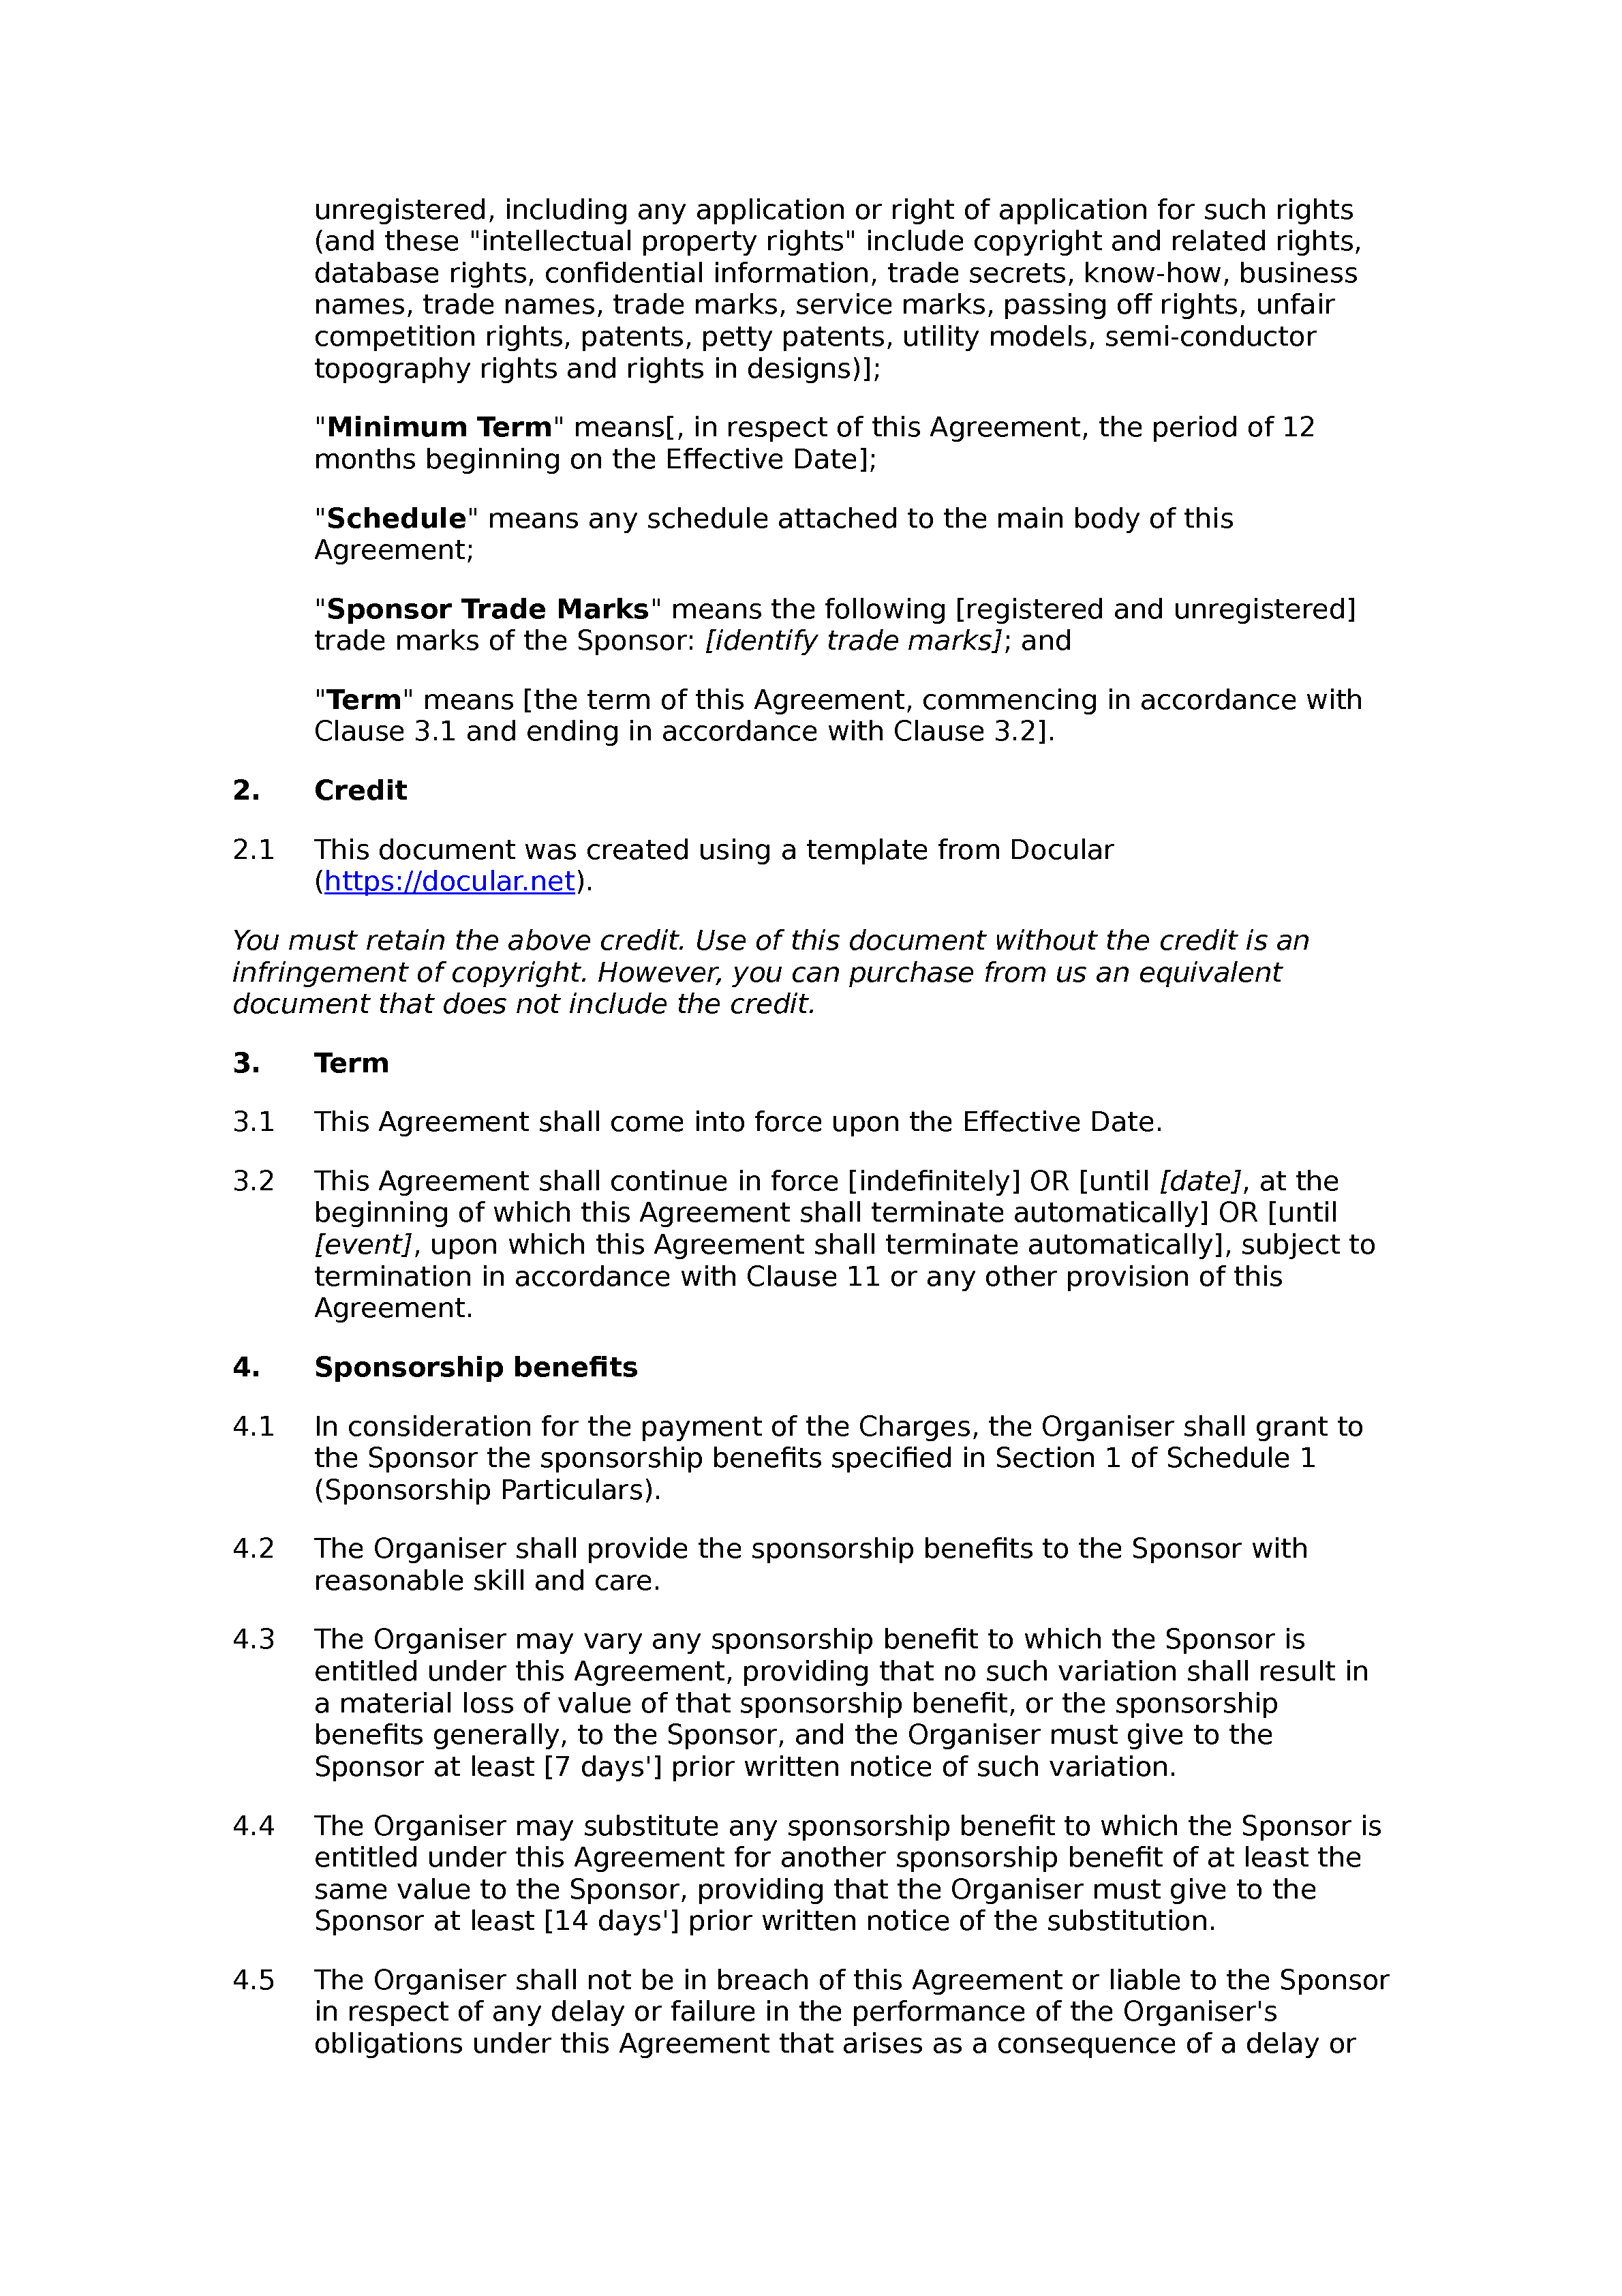 Free sponsorship agreement document preview